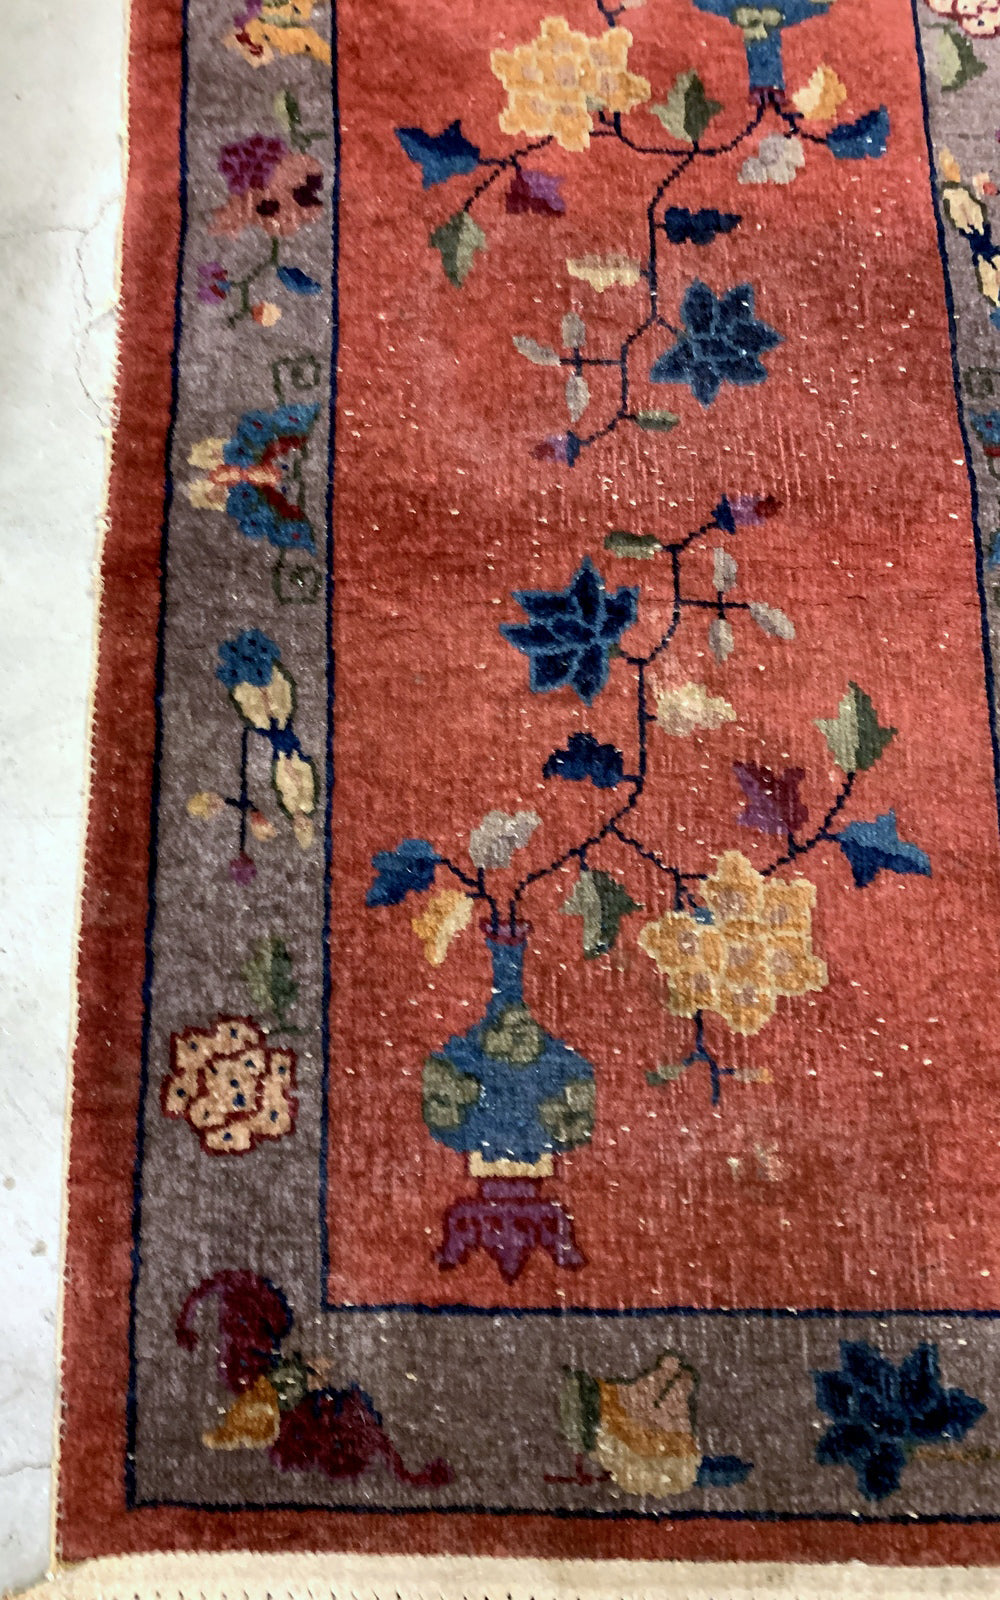 Handmade antique Art Deco Chinese rug in red shade with greyish border. The rug has traditional floral Art Deco design. It is from the beginning of 20th century in original condition, it has some low pile.